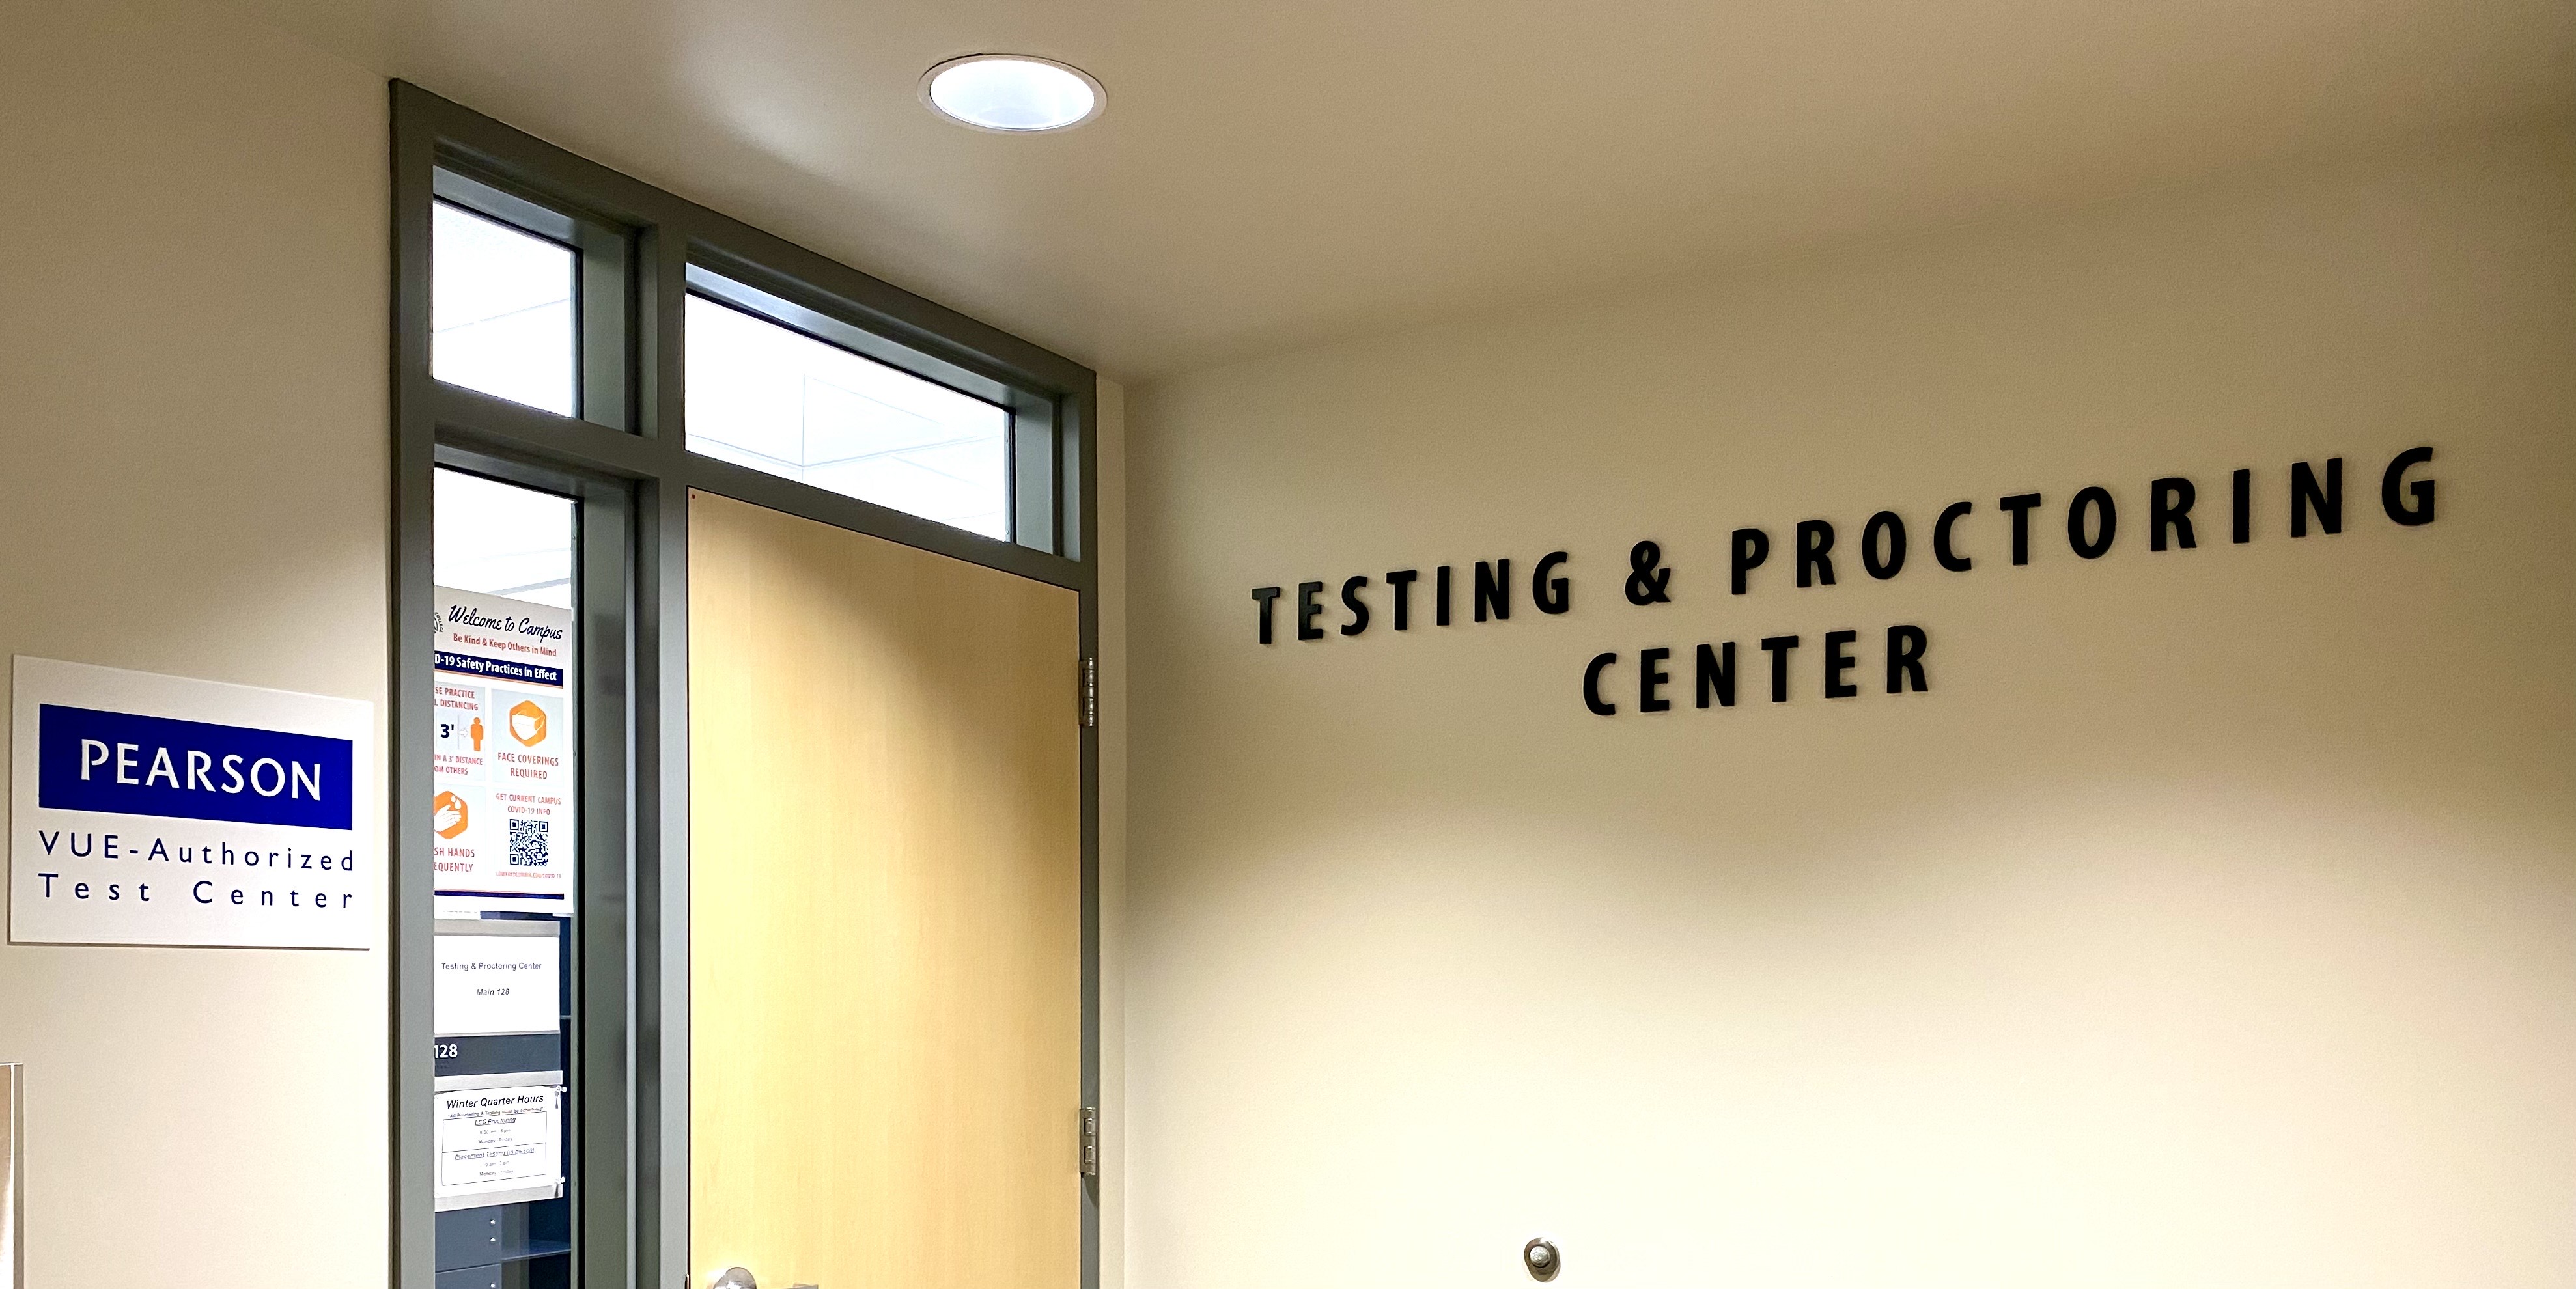 Testing and proctoring center